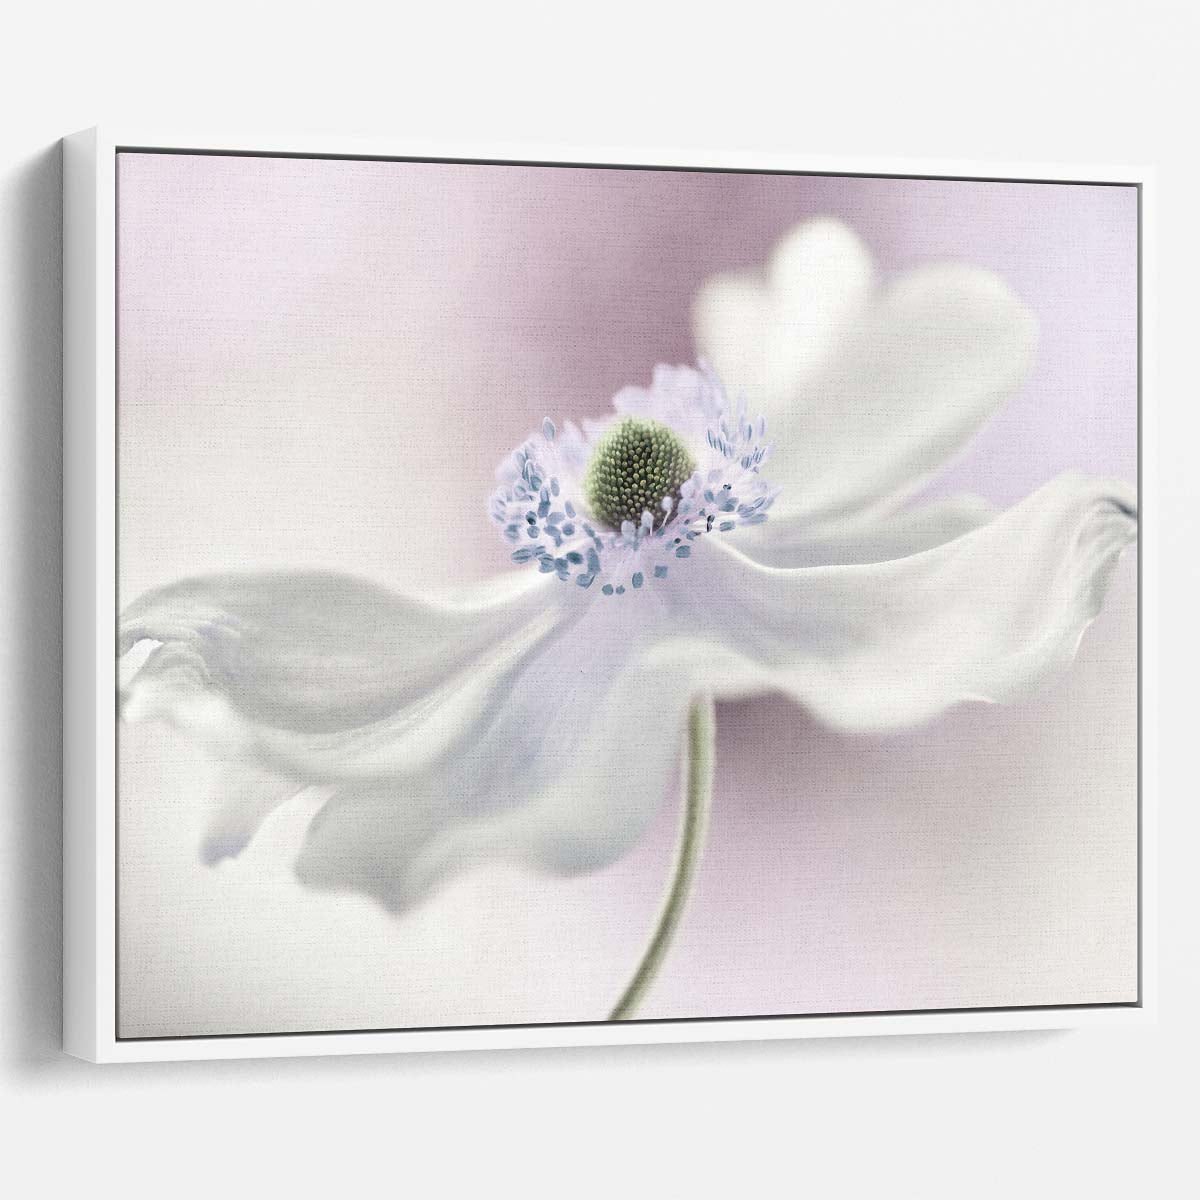 Delicate Pink Anemone Macro Floral Wall Art by Luxuriance Designs. Made in USA.